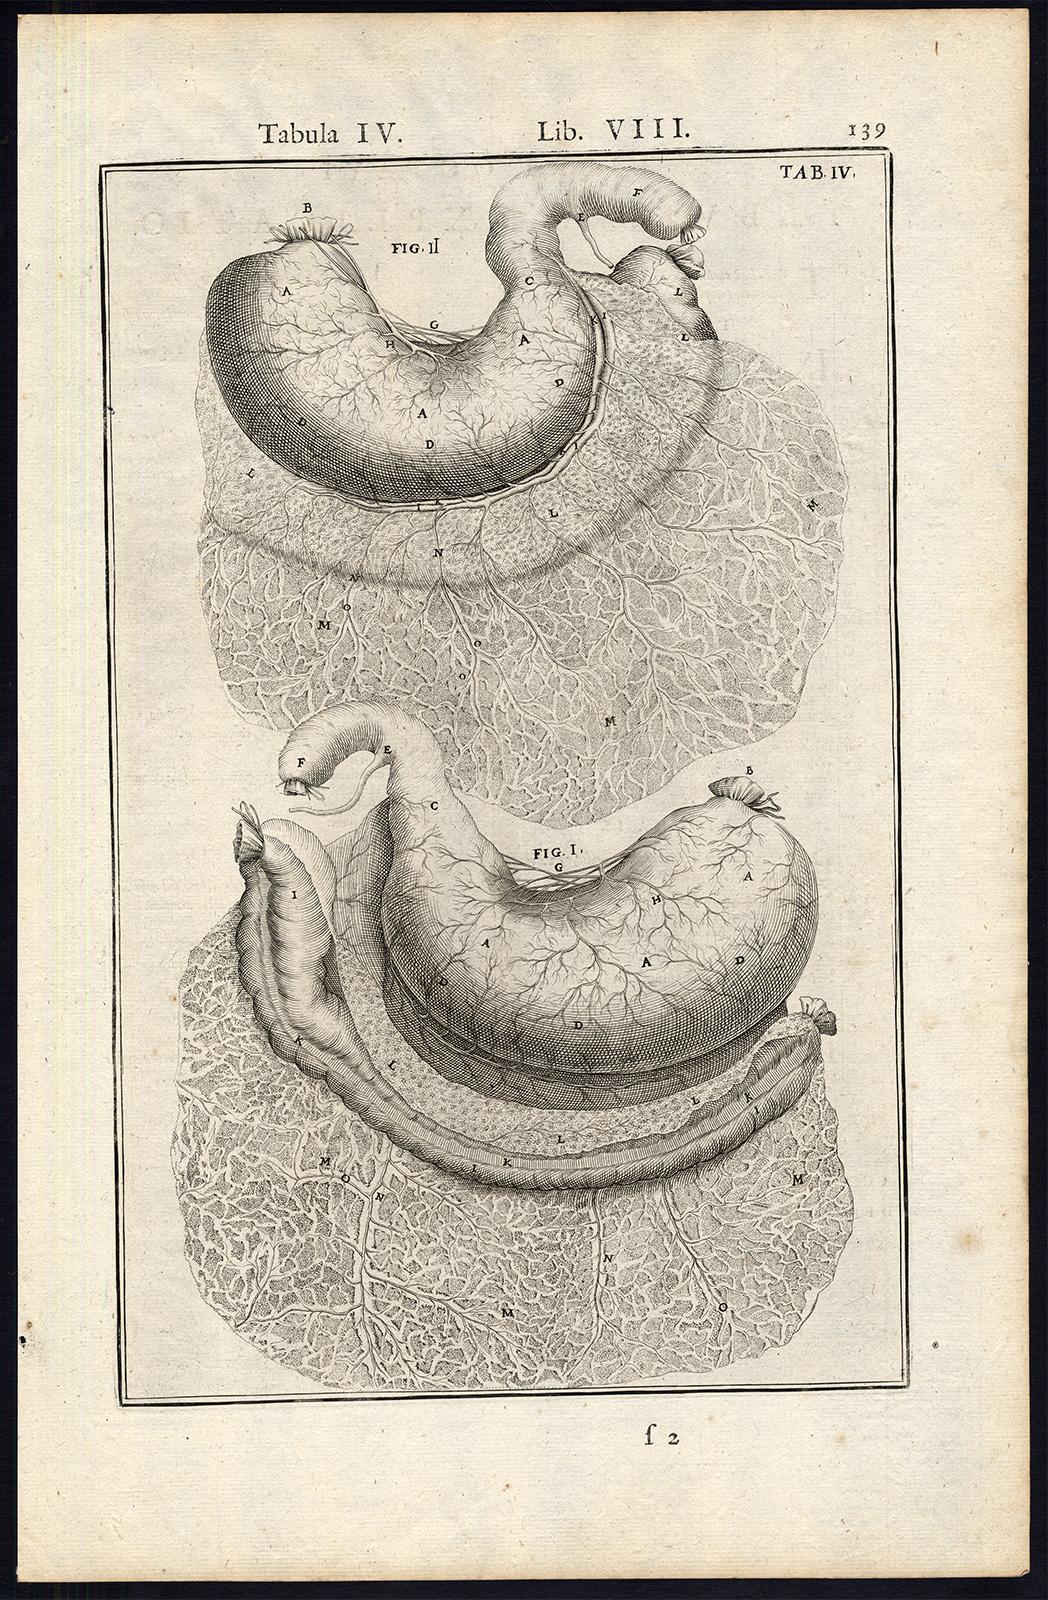 Anatomical print - stomach and colon - by Spigelius - Engraving - 17th c - Print by Adrianus Spigelius